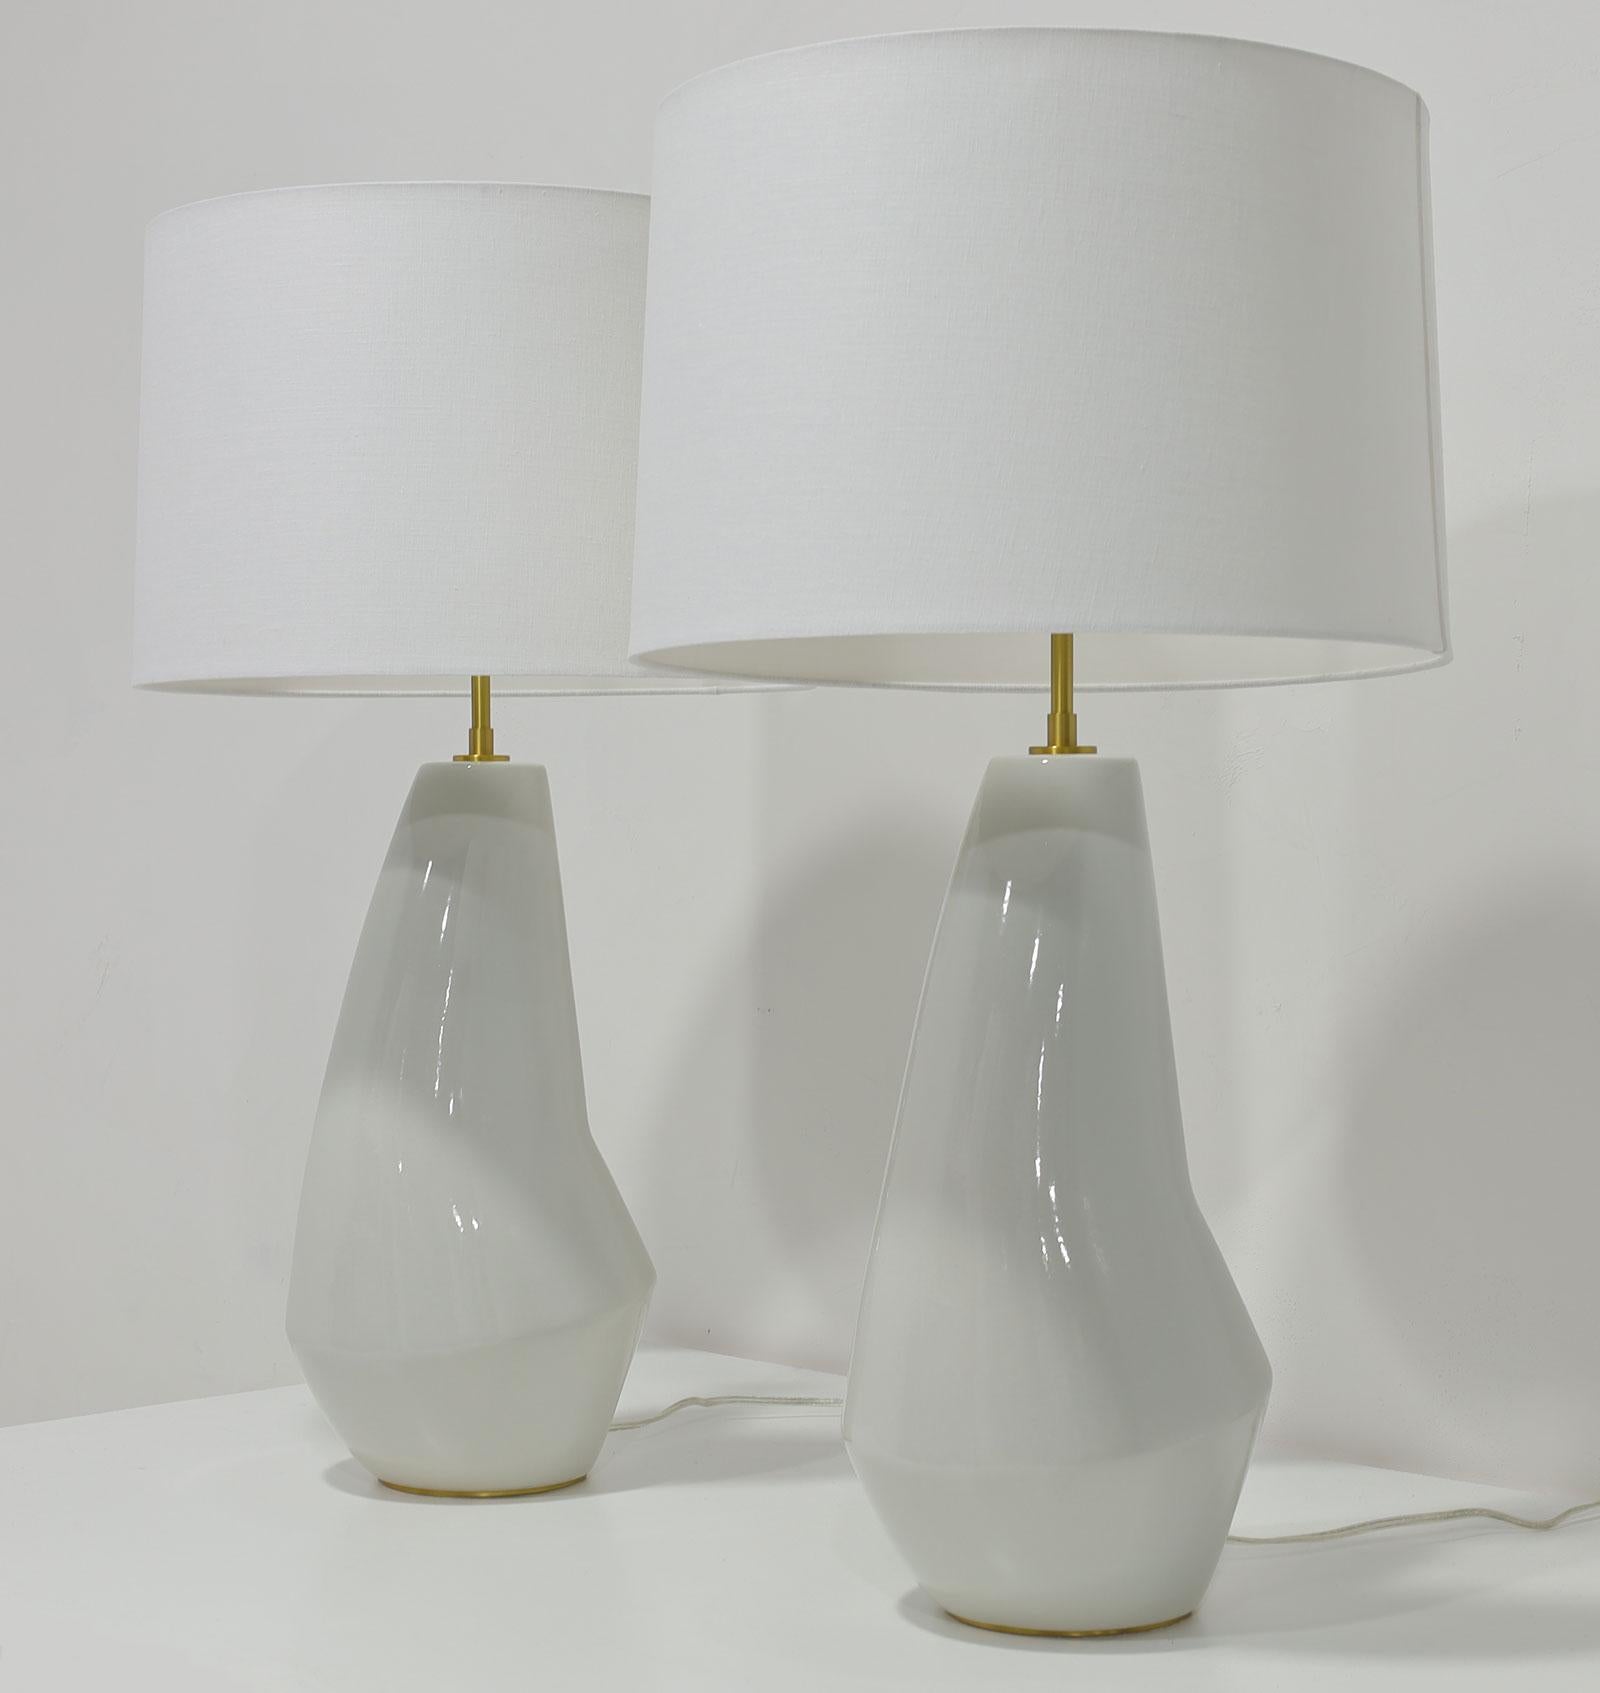 Modern Pair of Contour Artic White Ceramic Table Lamps by Kelly Wearstler For Sale